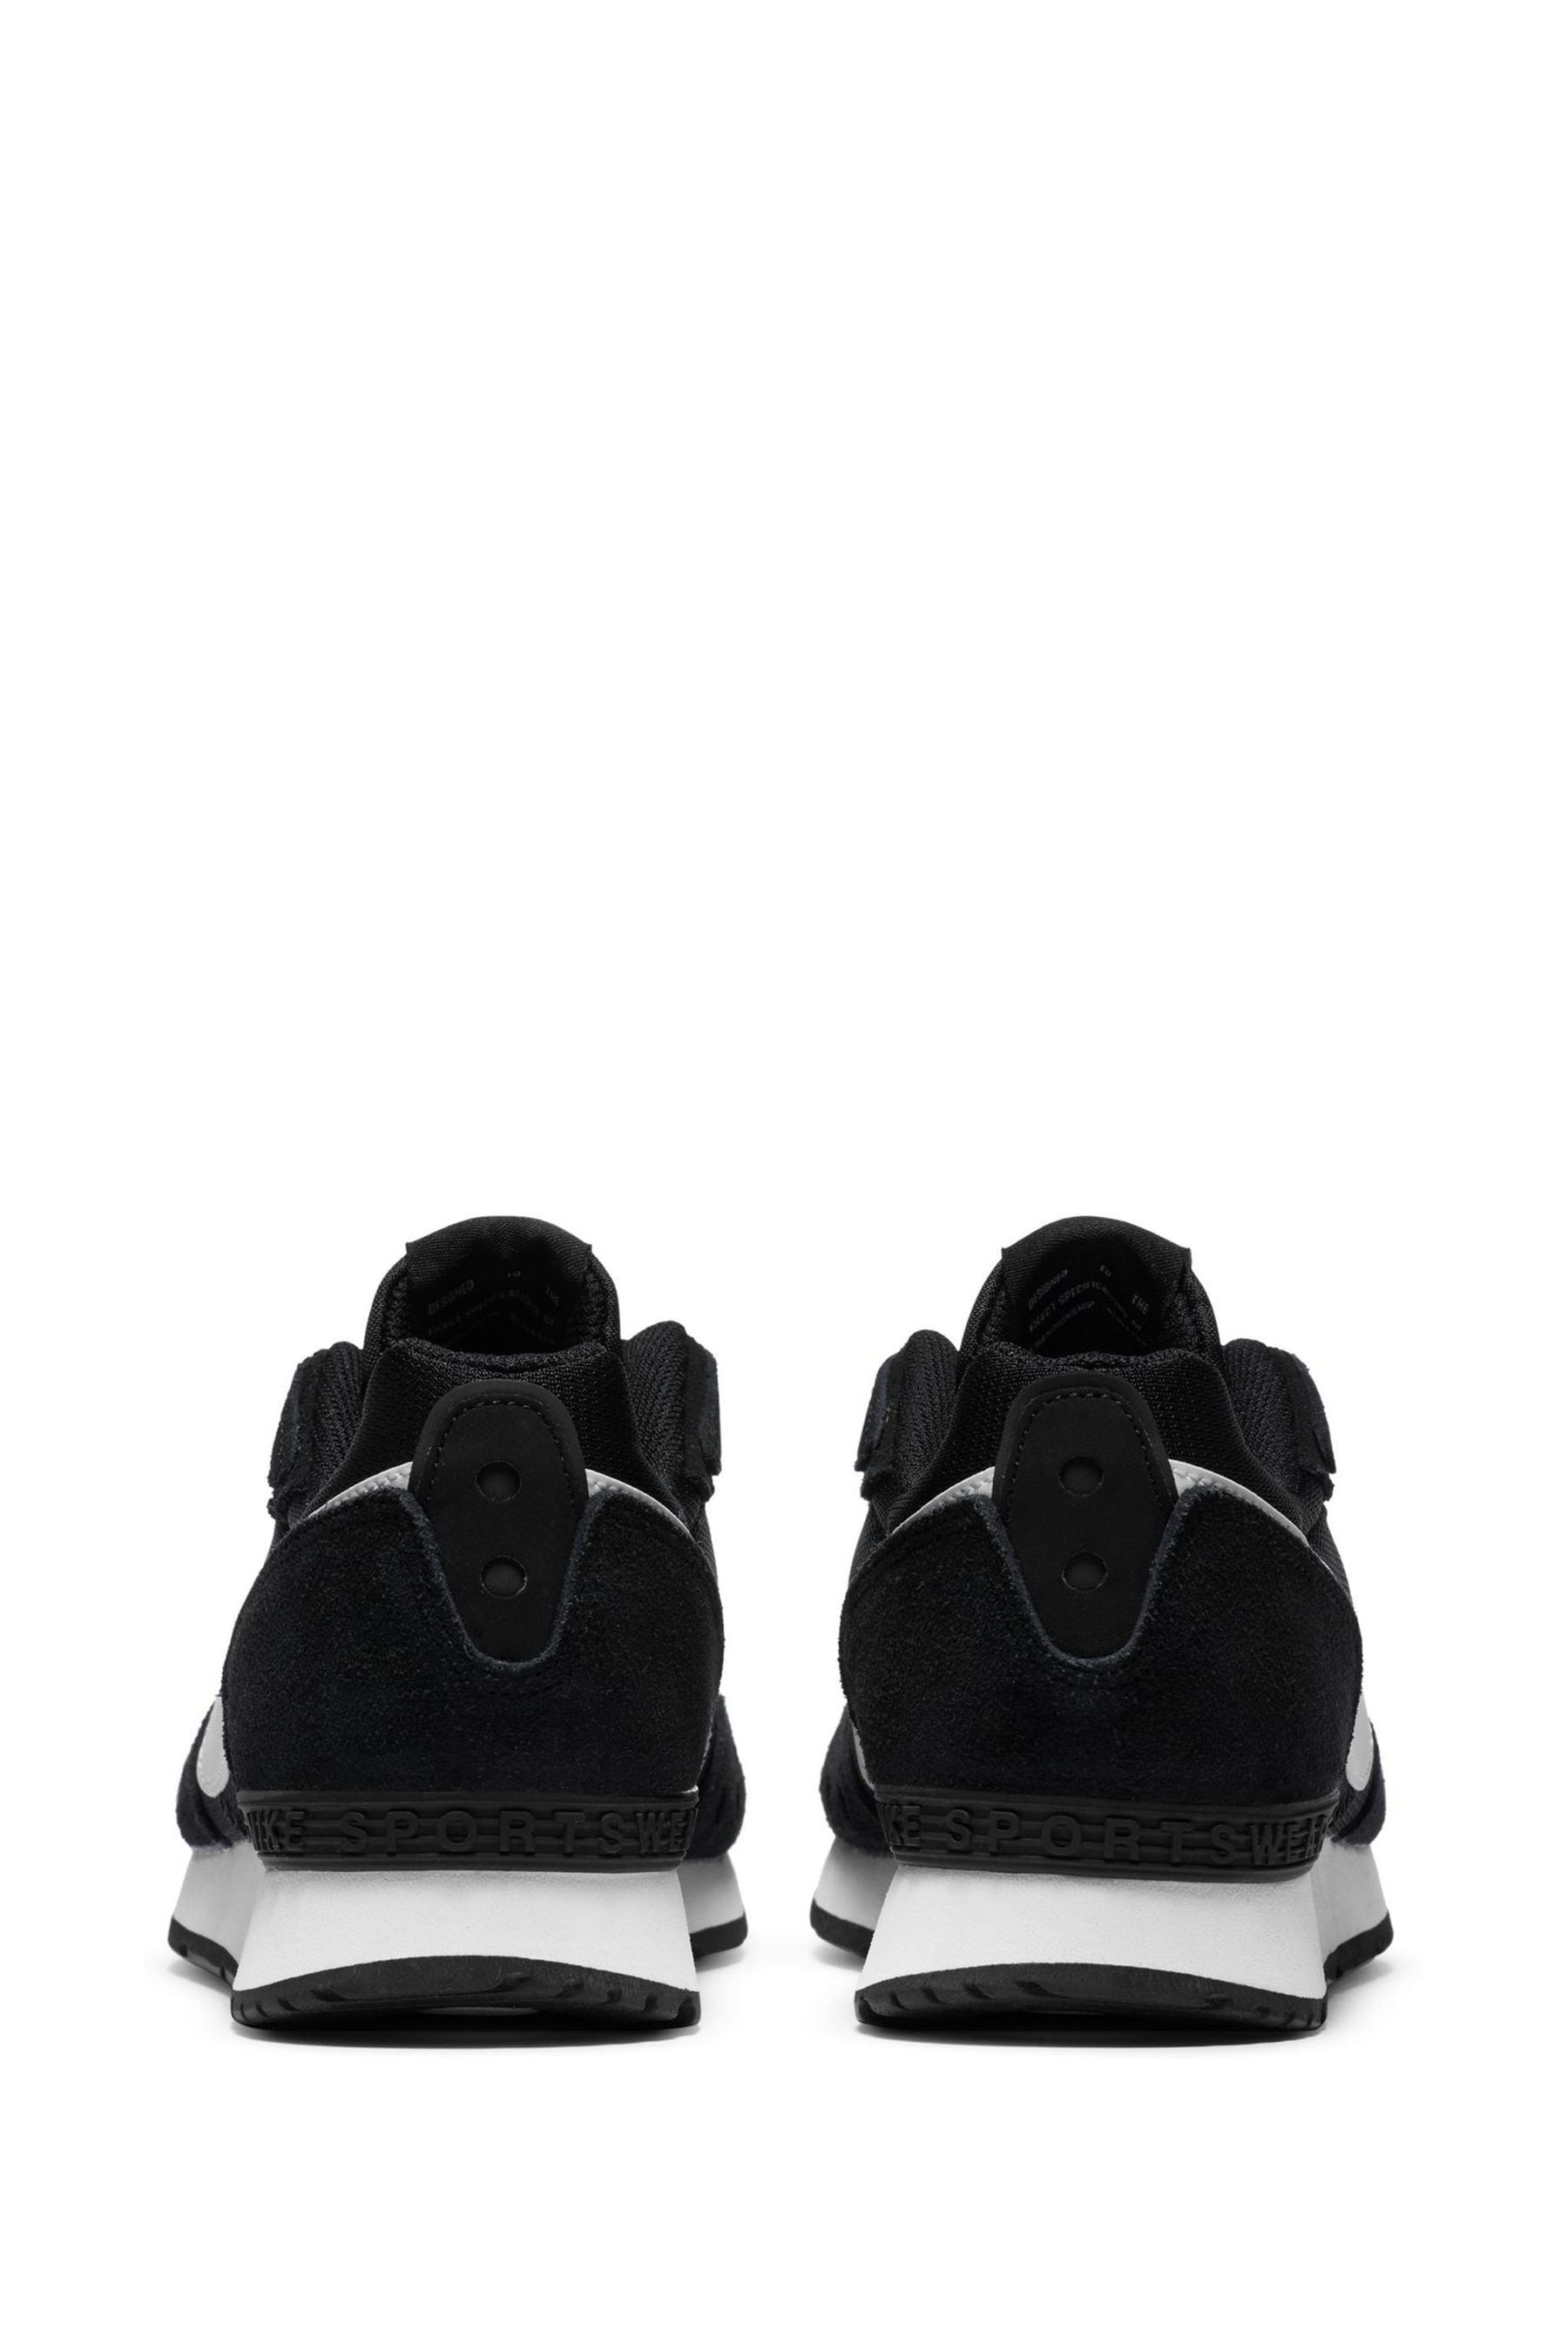 Buy Nike Black Venture Runner Trainers from the Next UK online shop